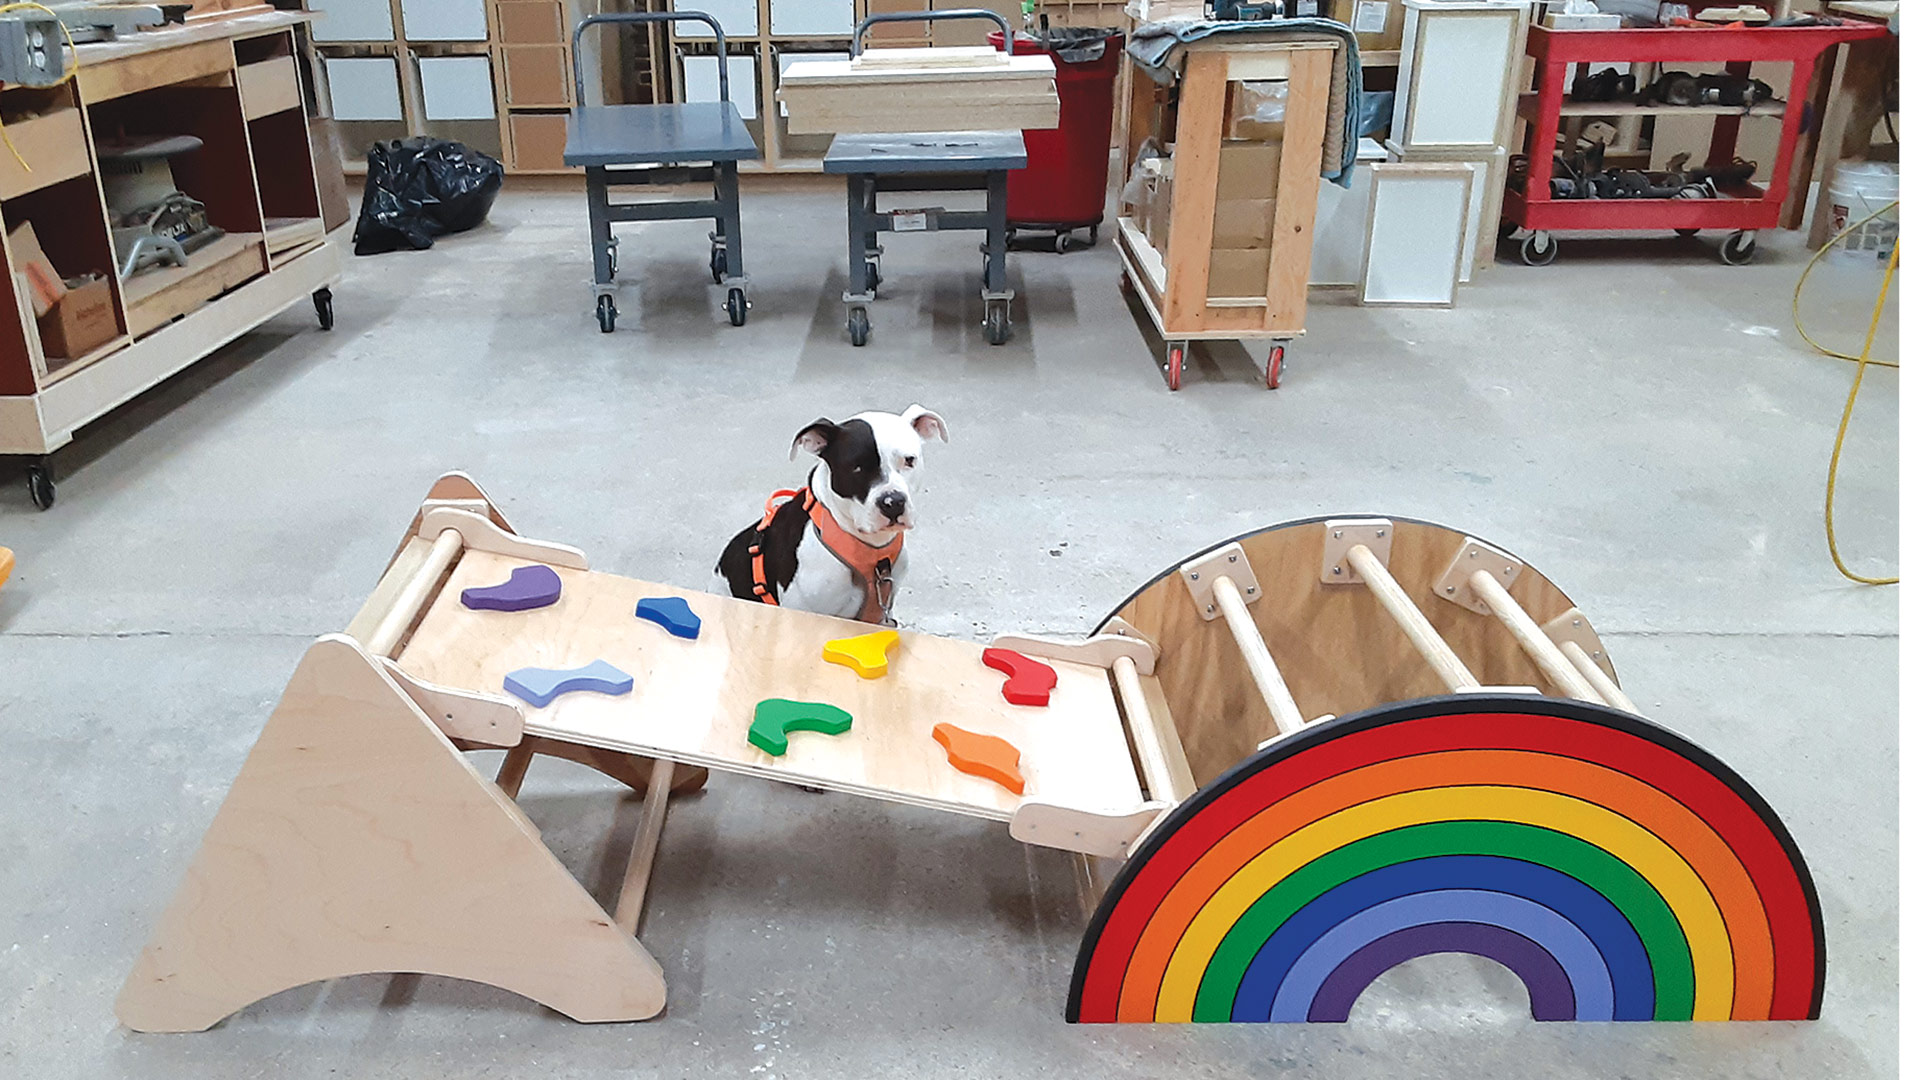 Kali the ‘office manager’ checks out a kid gym Tom Brogle made.